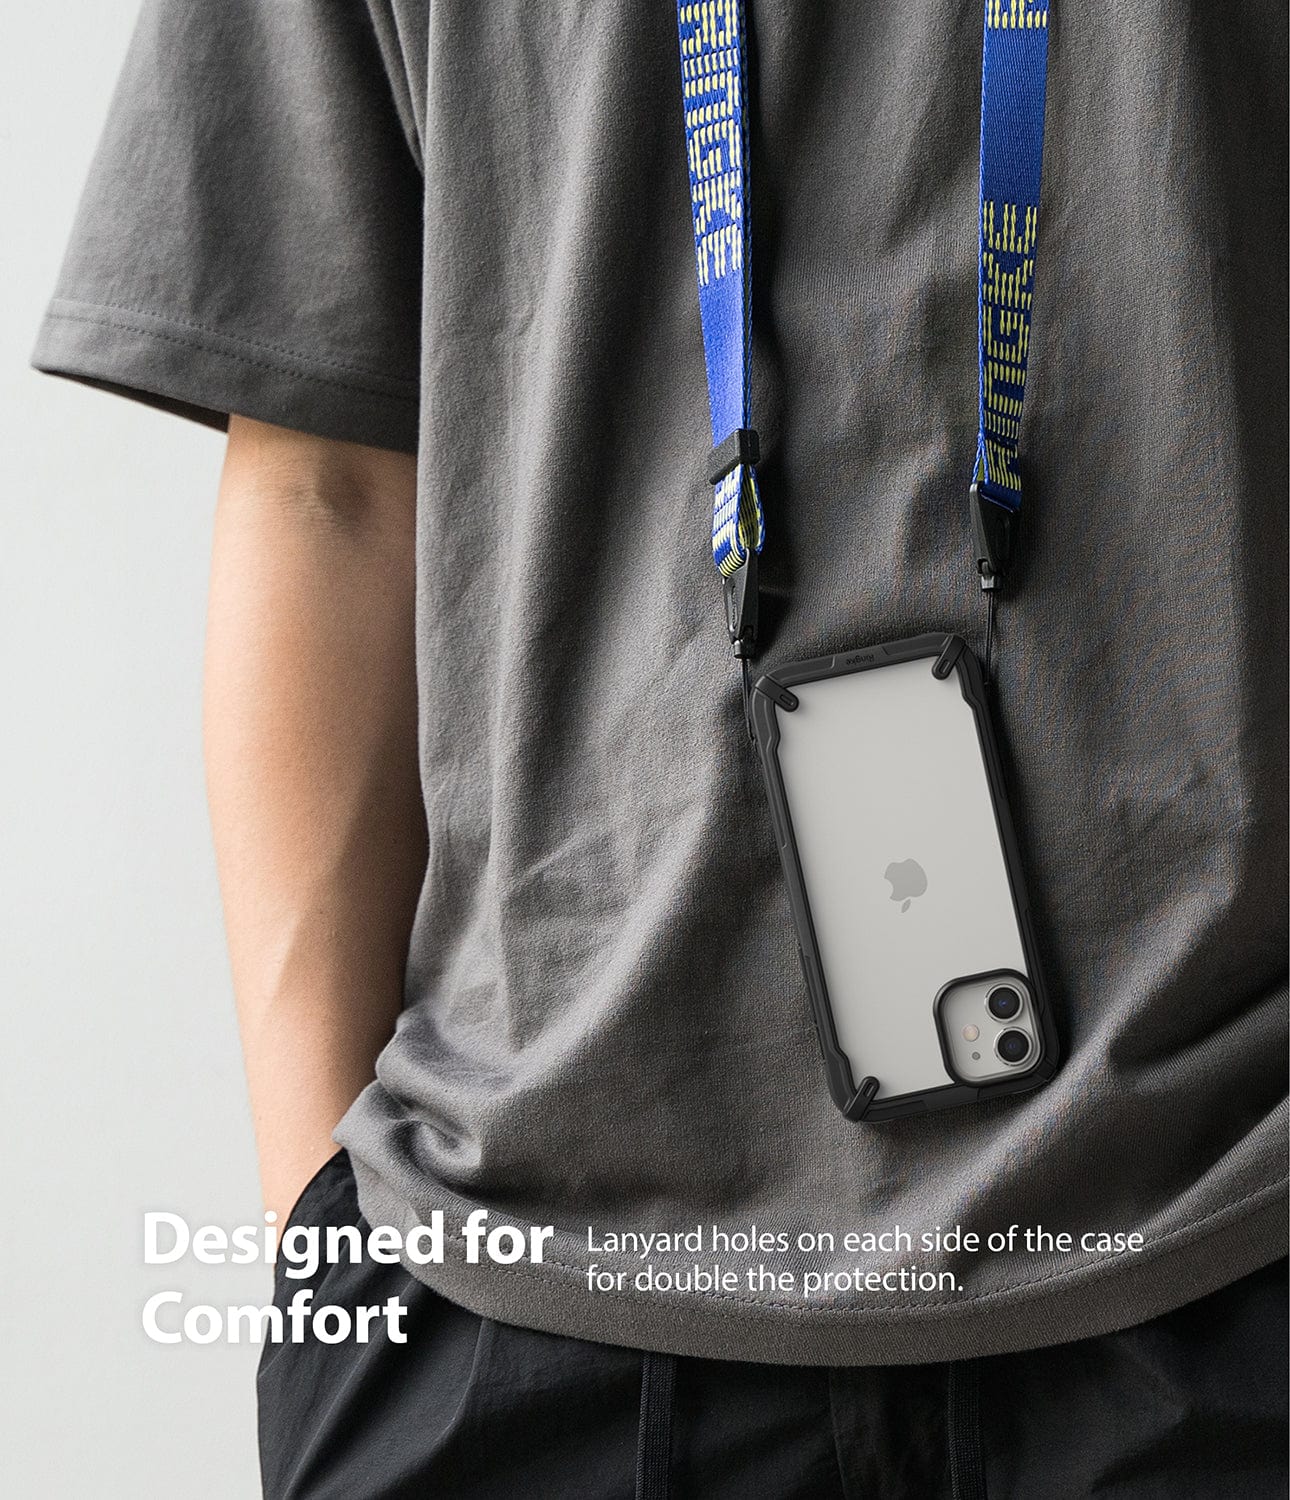 Lanyard holes provides double protection for iPhone 12 Pro case 